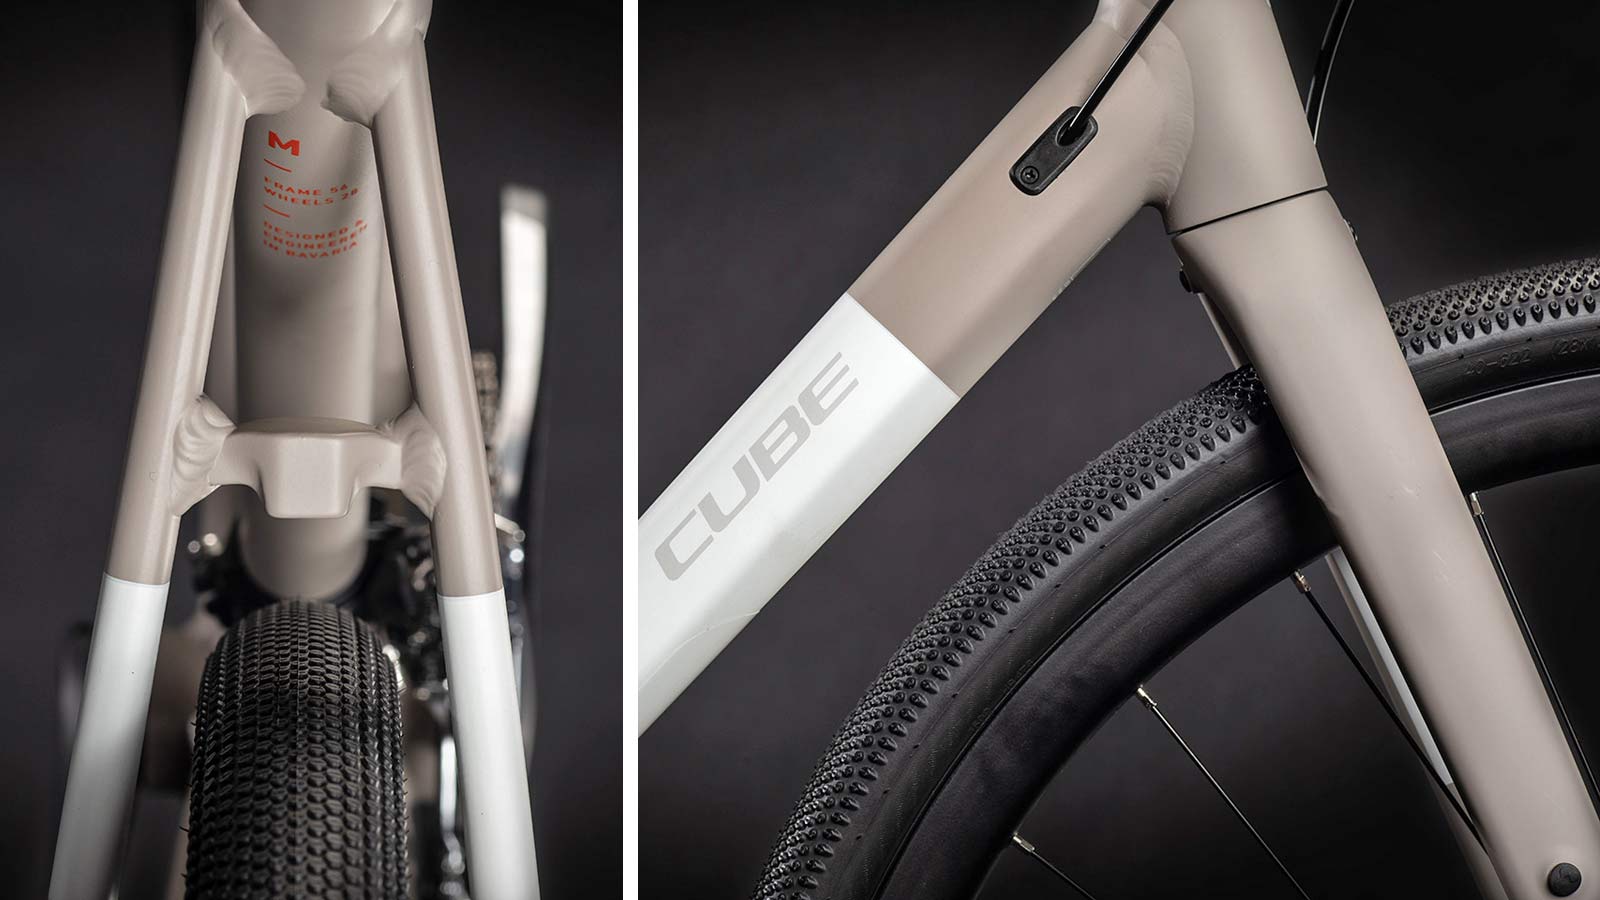 2021 Cube SL Road bike is an affordable, versatile alloy flat bar all-road & gravel bike, tire clearance details